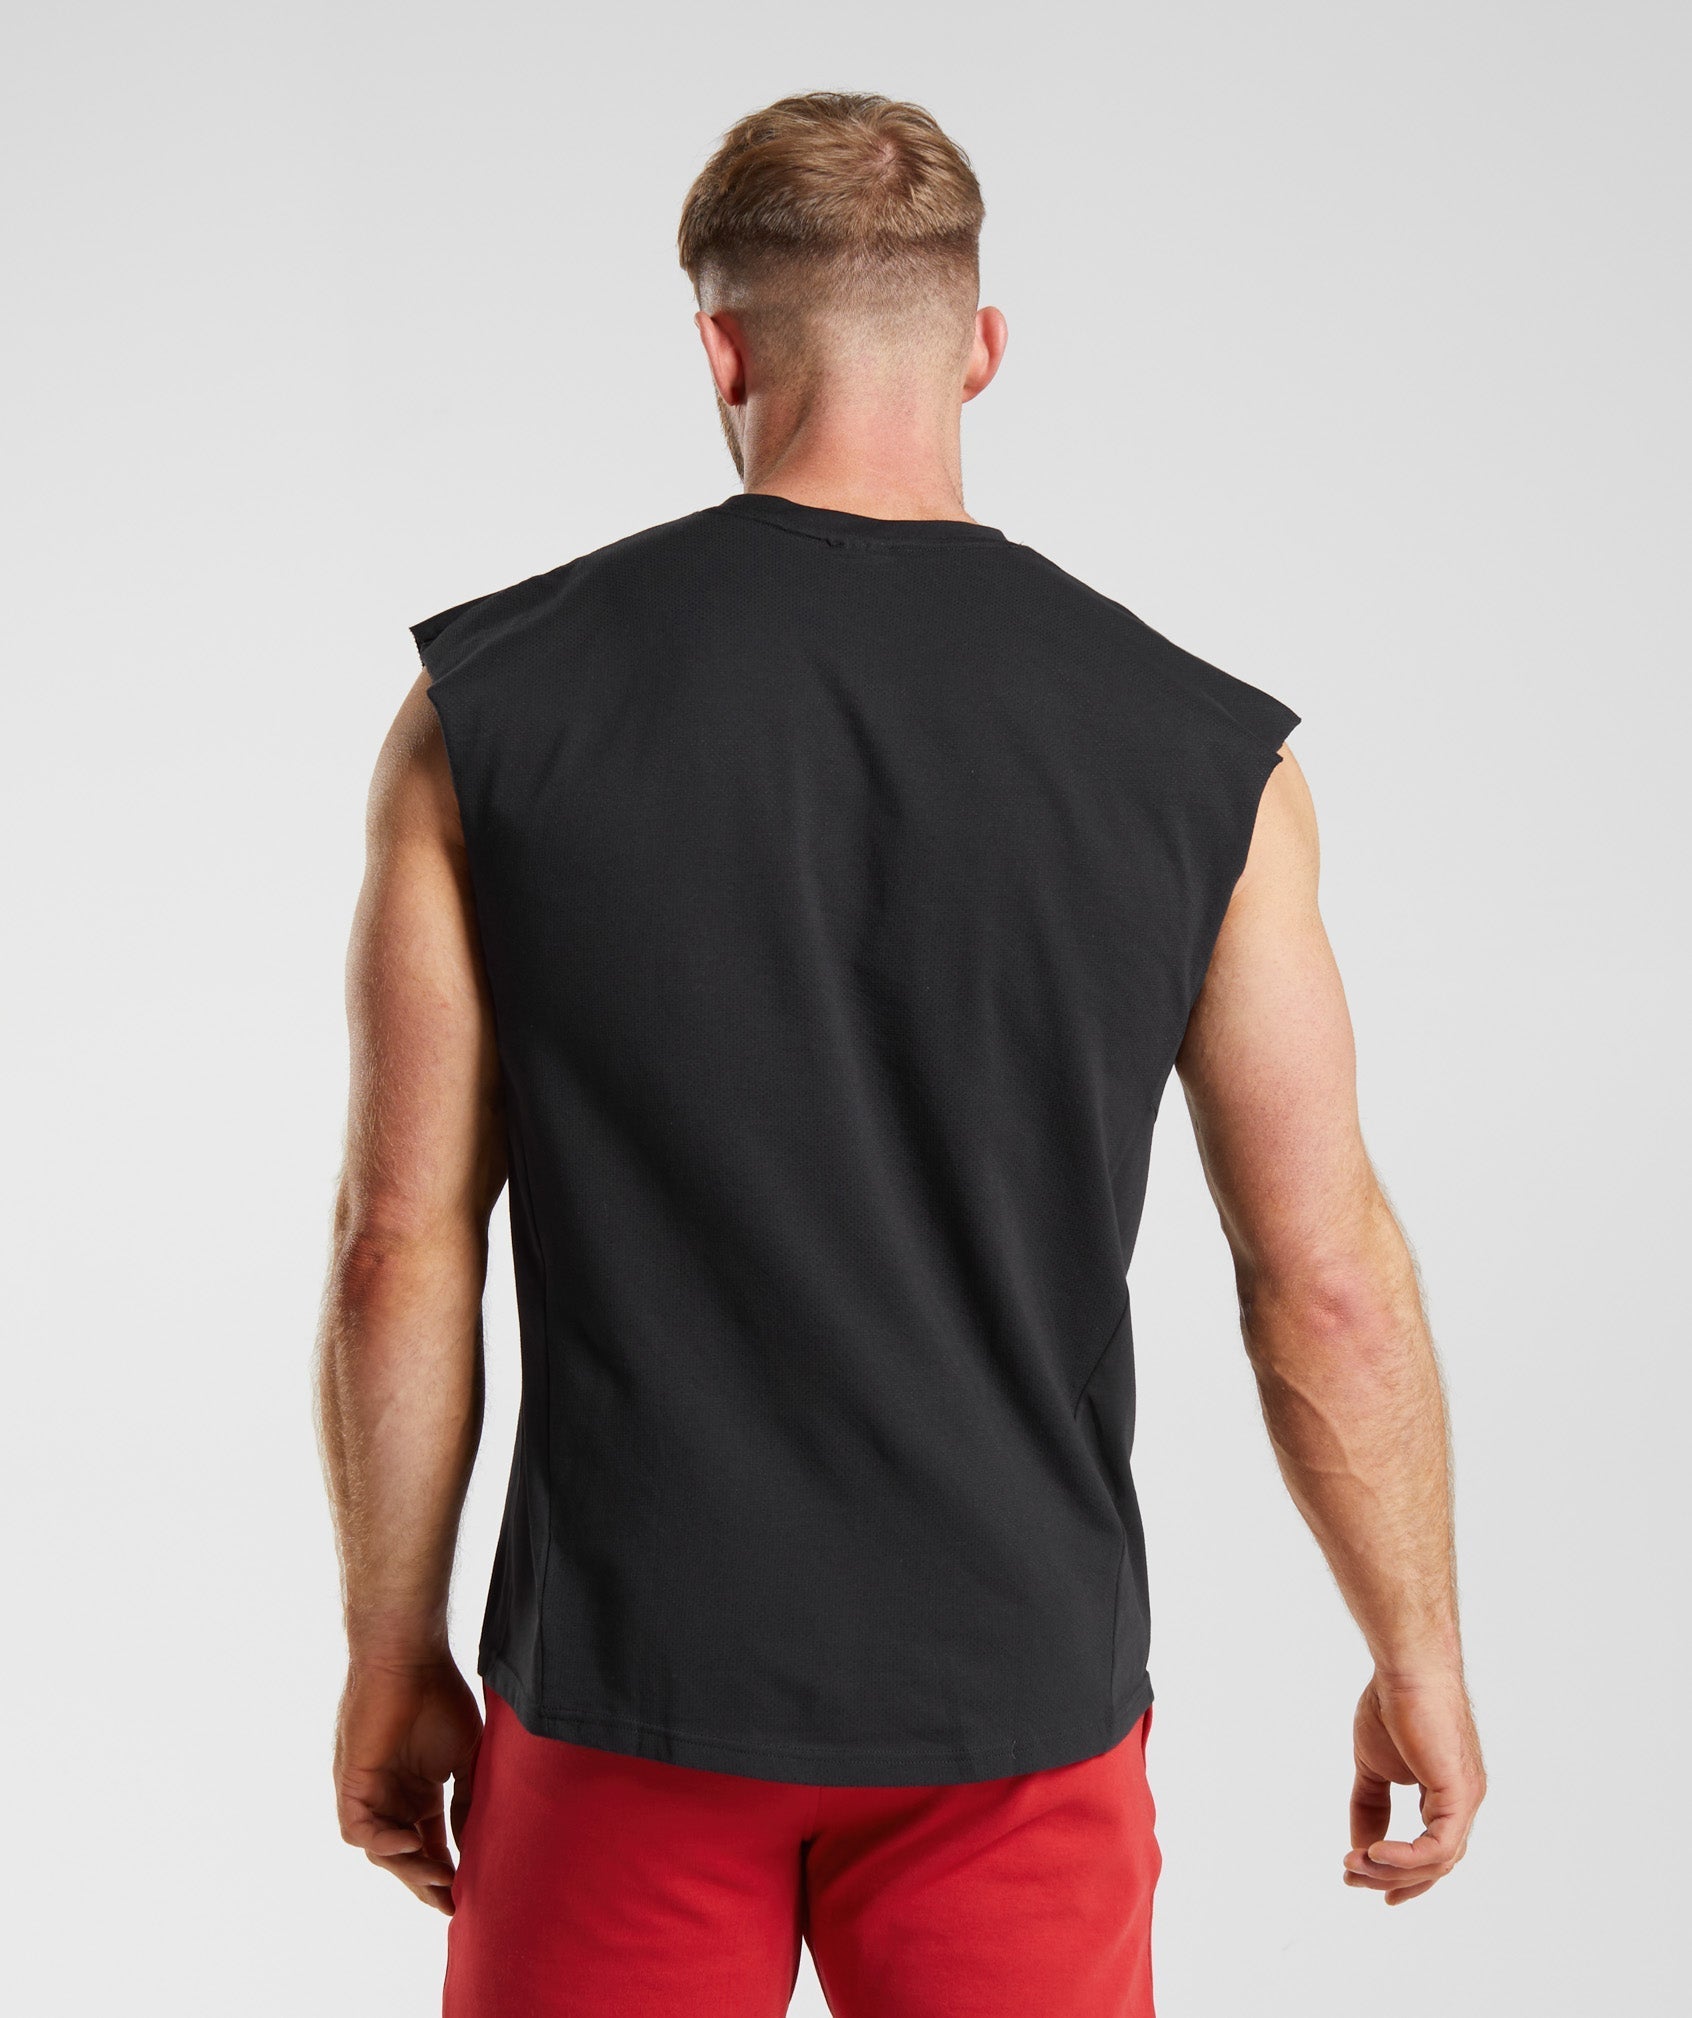 React Cut Off Tank in Black - view 4